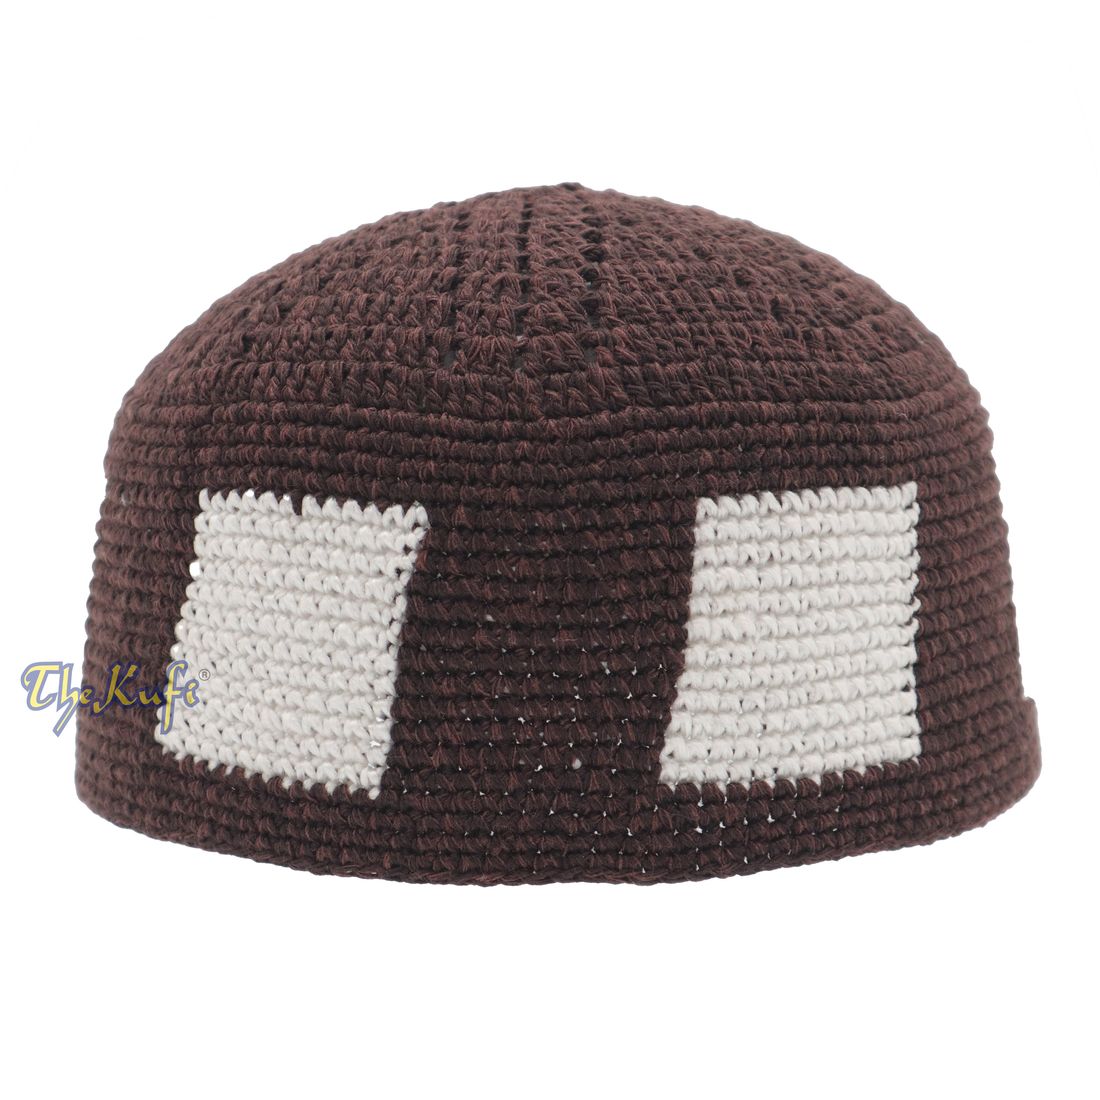 Hand-crocheted Dark Brown Kufi With White Squares For Kids